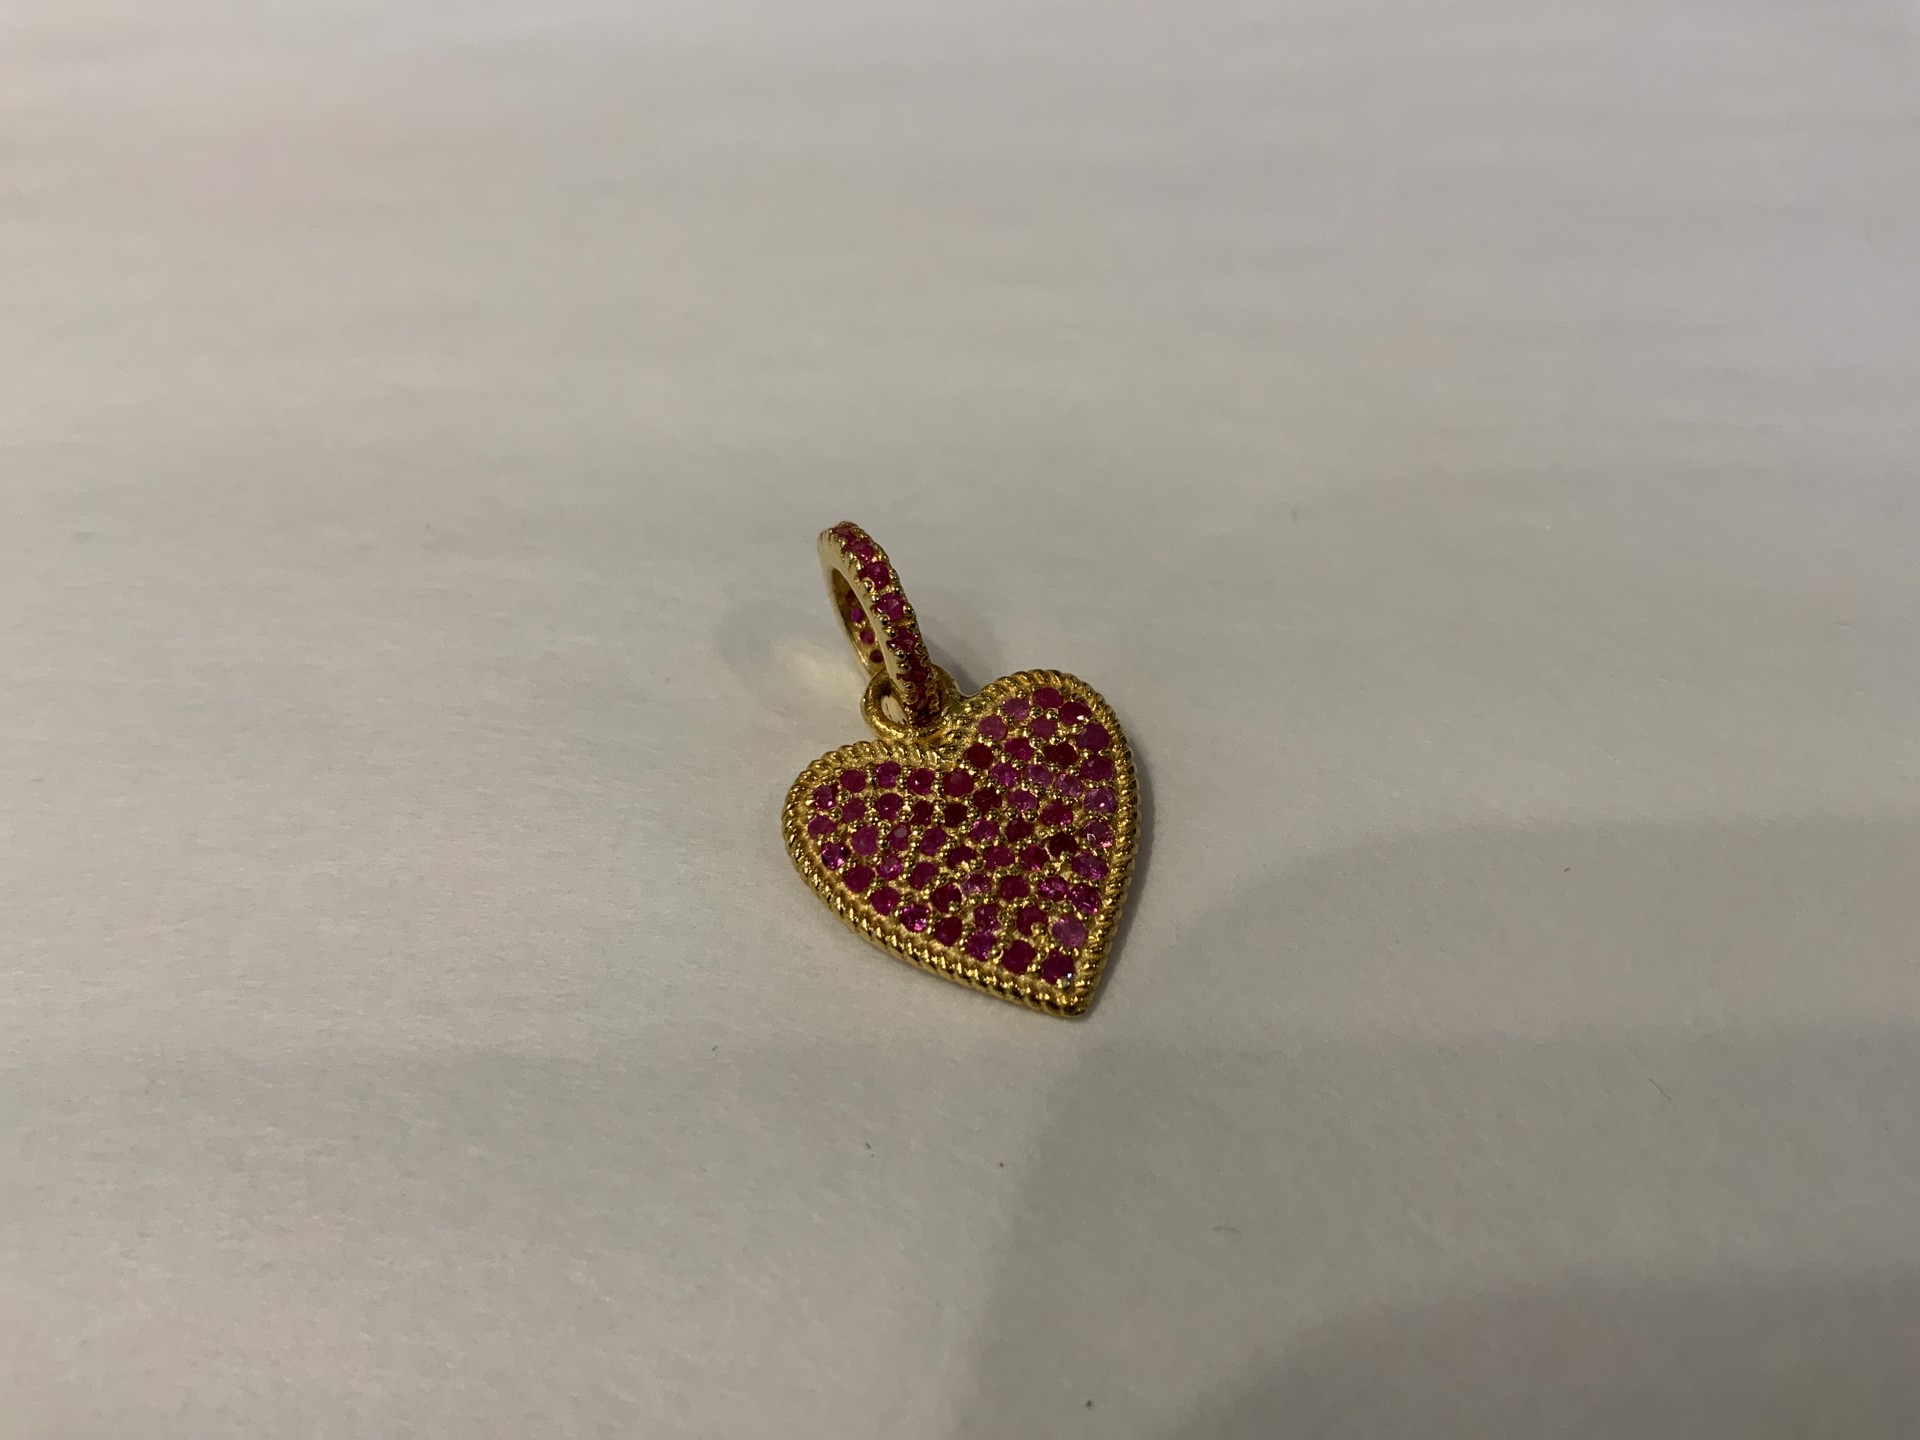 Gold Vermeil and Pave Ruby Heart Pendant by Karen Birchmier